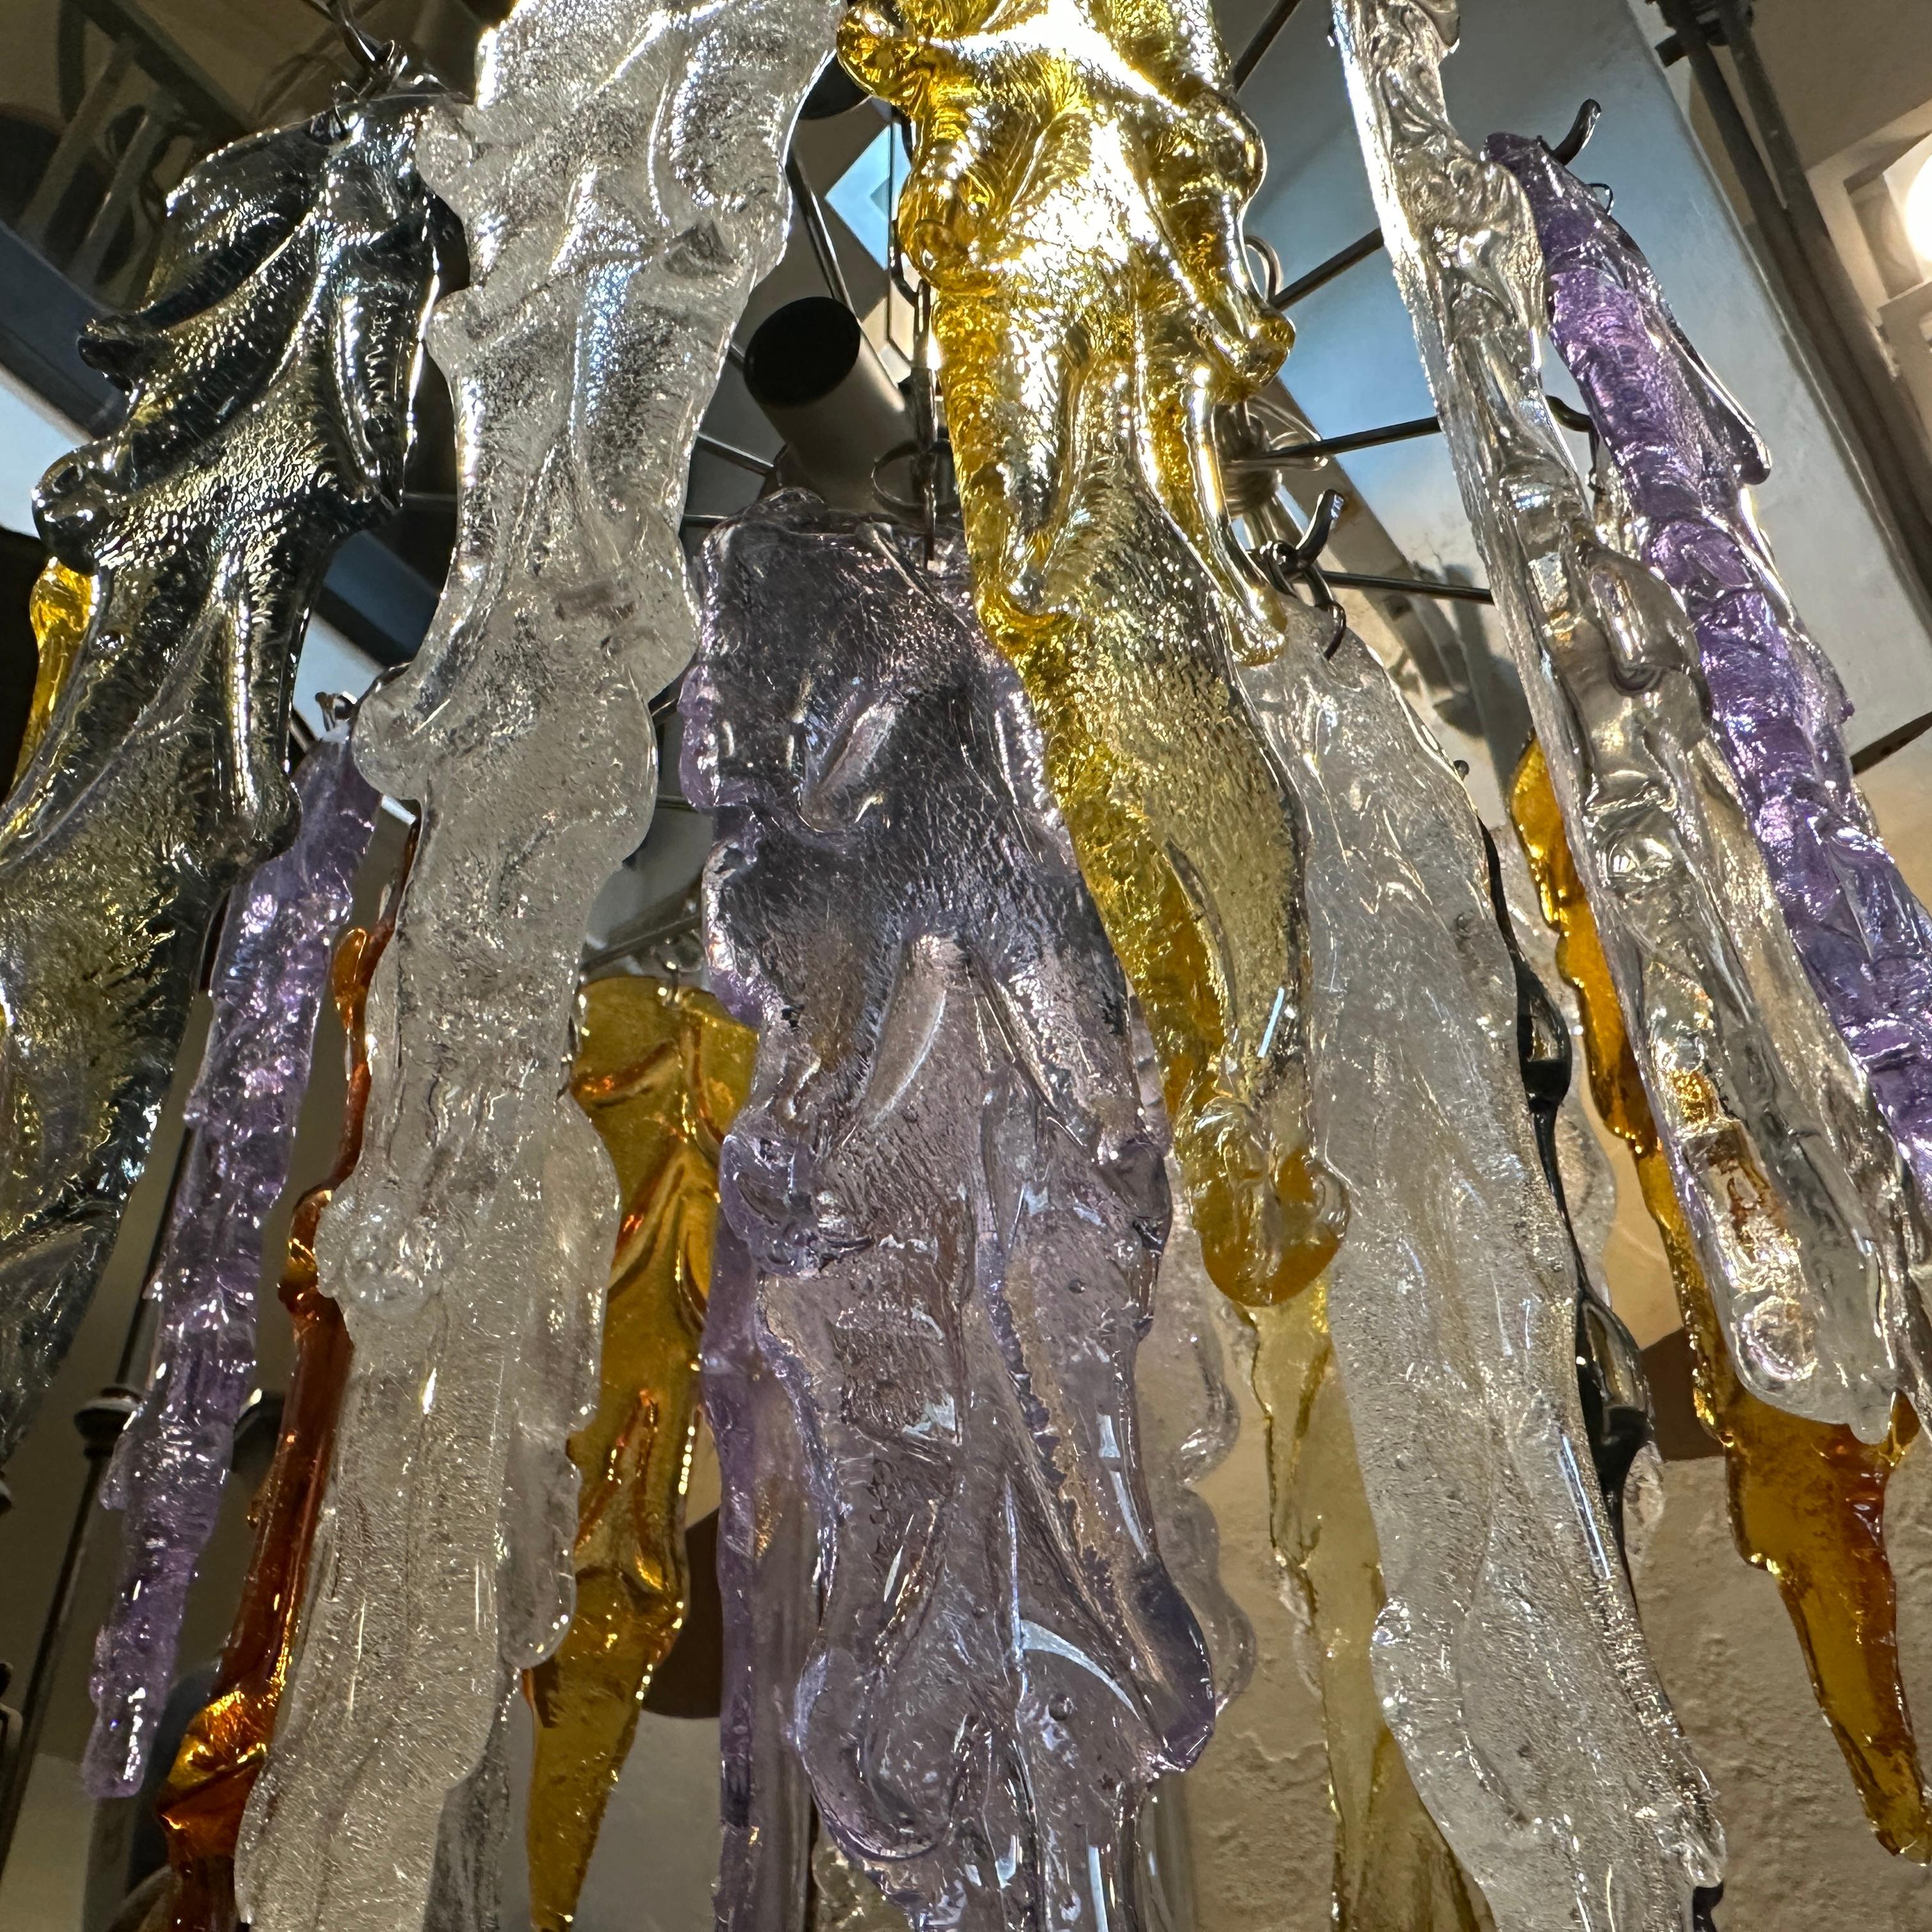 An amazing polychrome cascade murano glass chandelier designed and manufactured in the Eighties in Venice by Mazzega. The polychrome murano glass resemble stalactites in their shape, they are in very good condition as the chromed metal structure